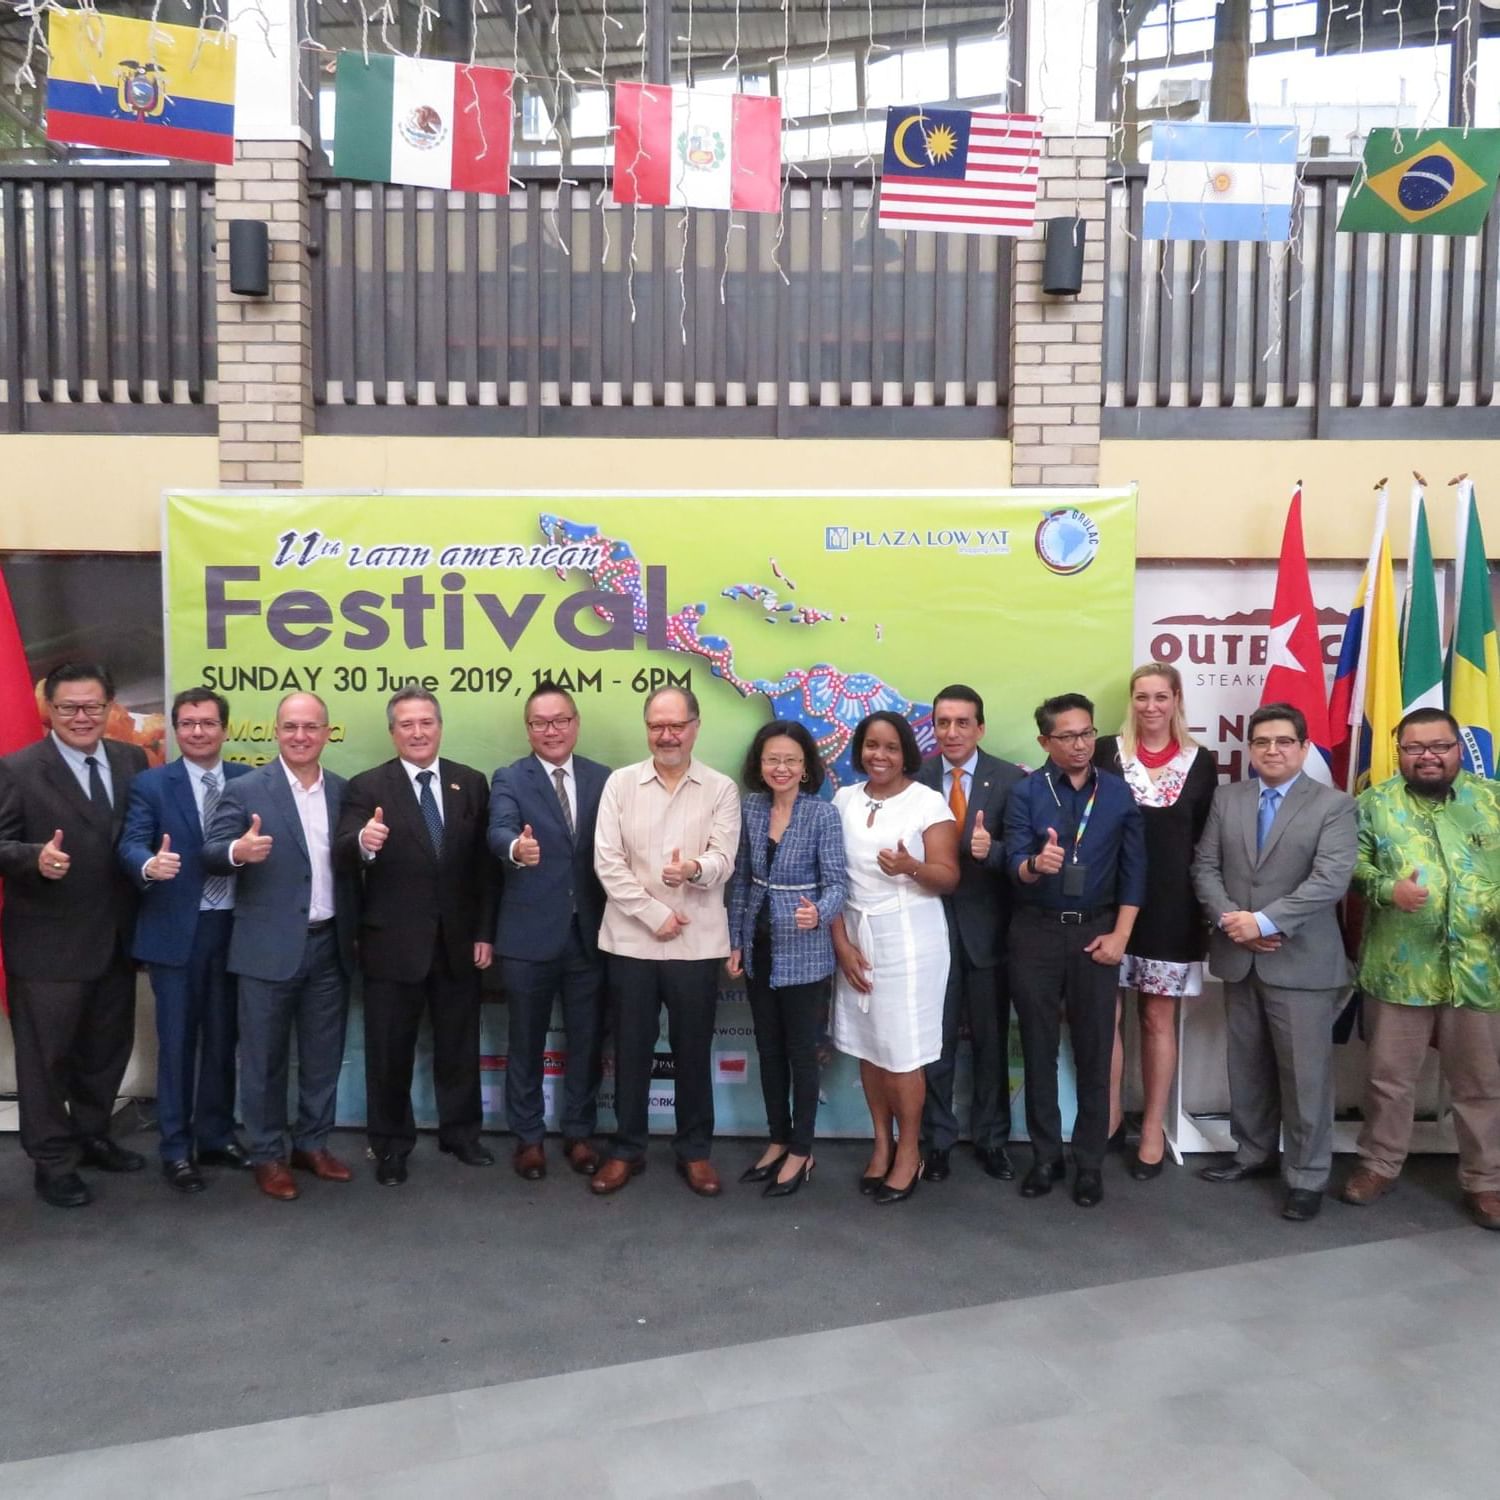 Latin American Festival Press Release at Federal Hotels